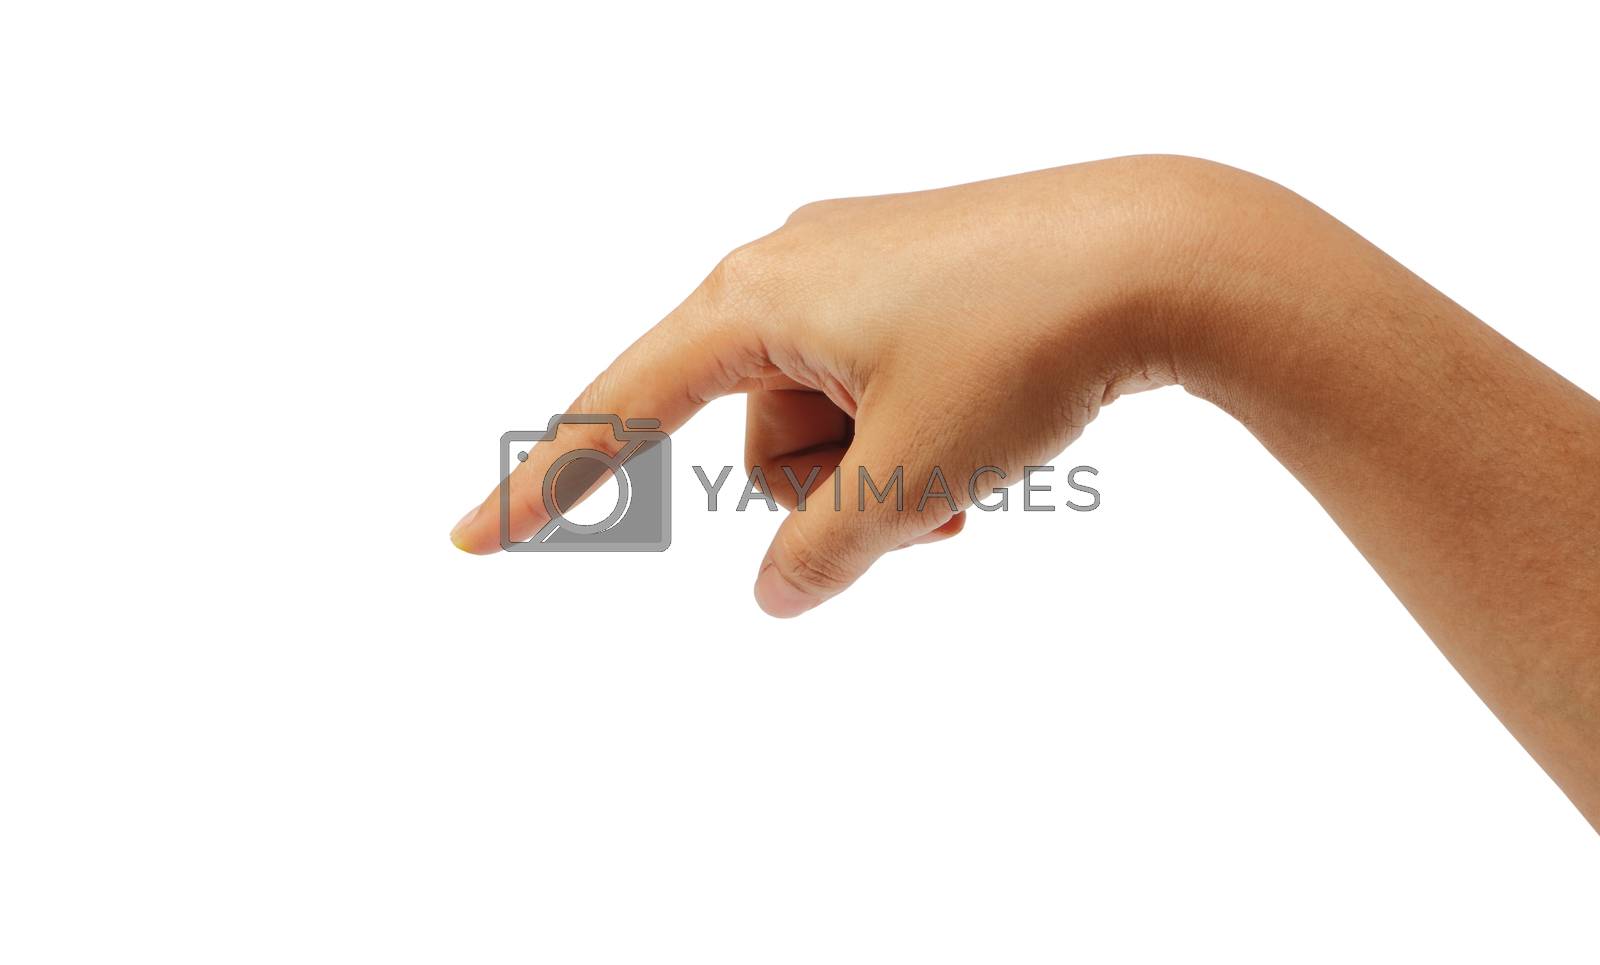 Royalty free image of Feale hand pointing finger isolated with clipping path.  by phalakon